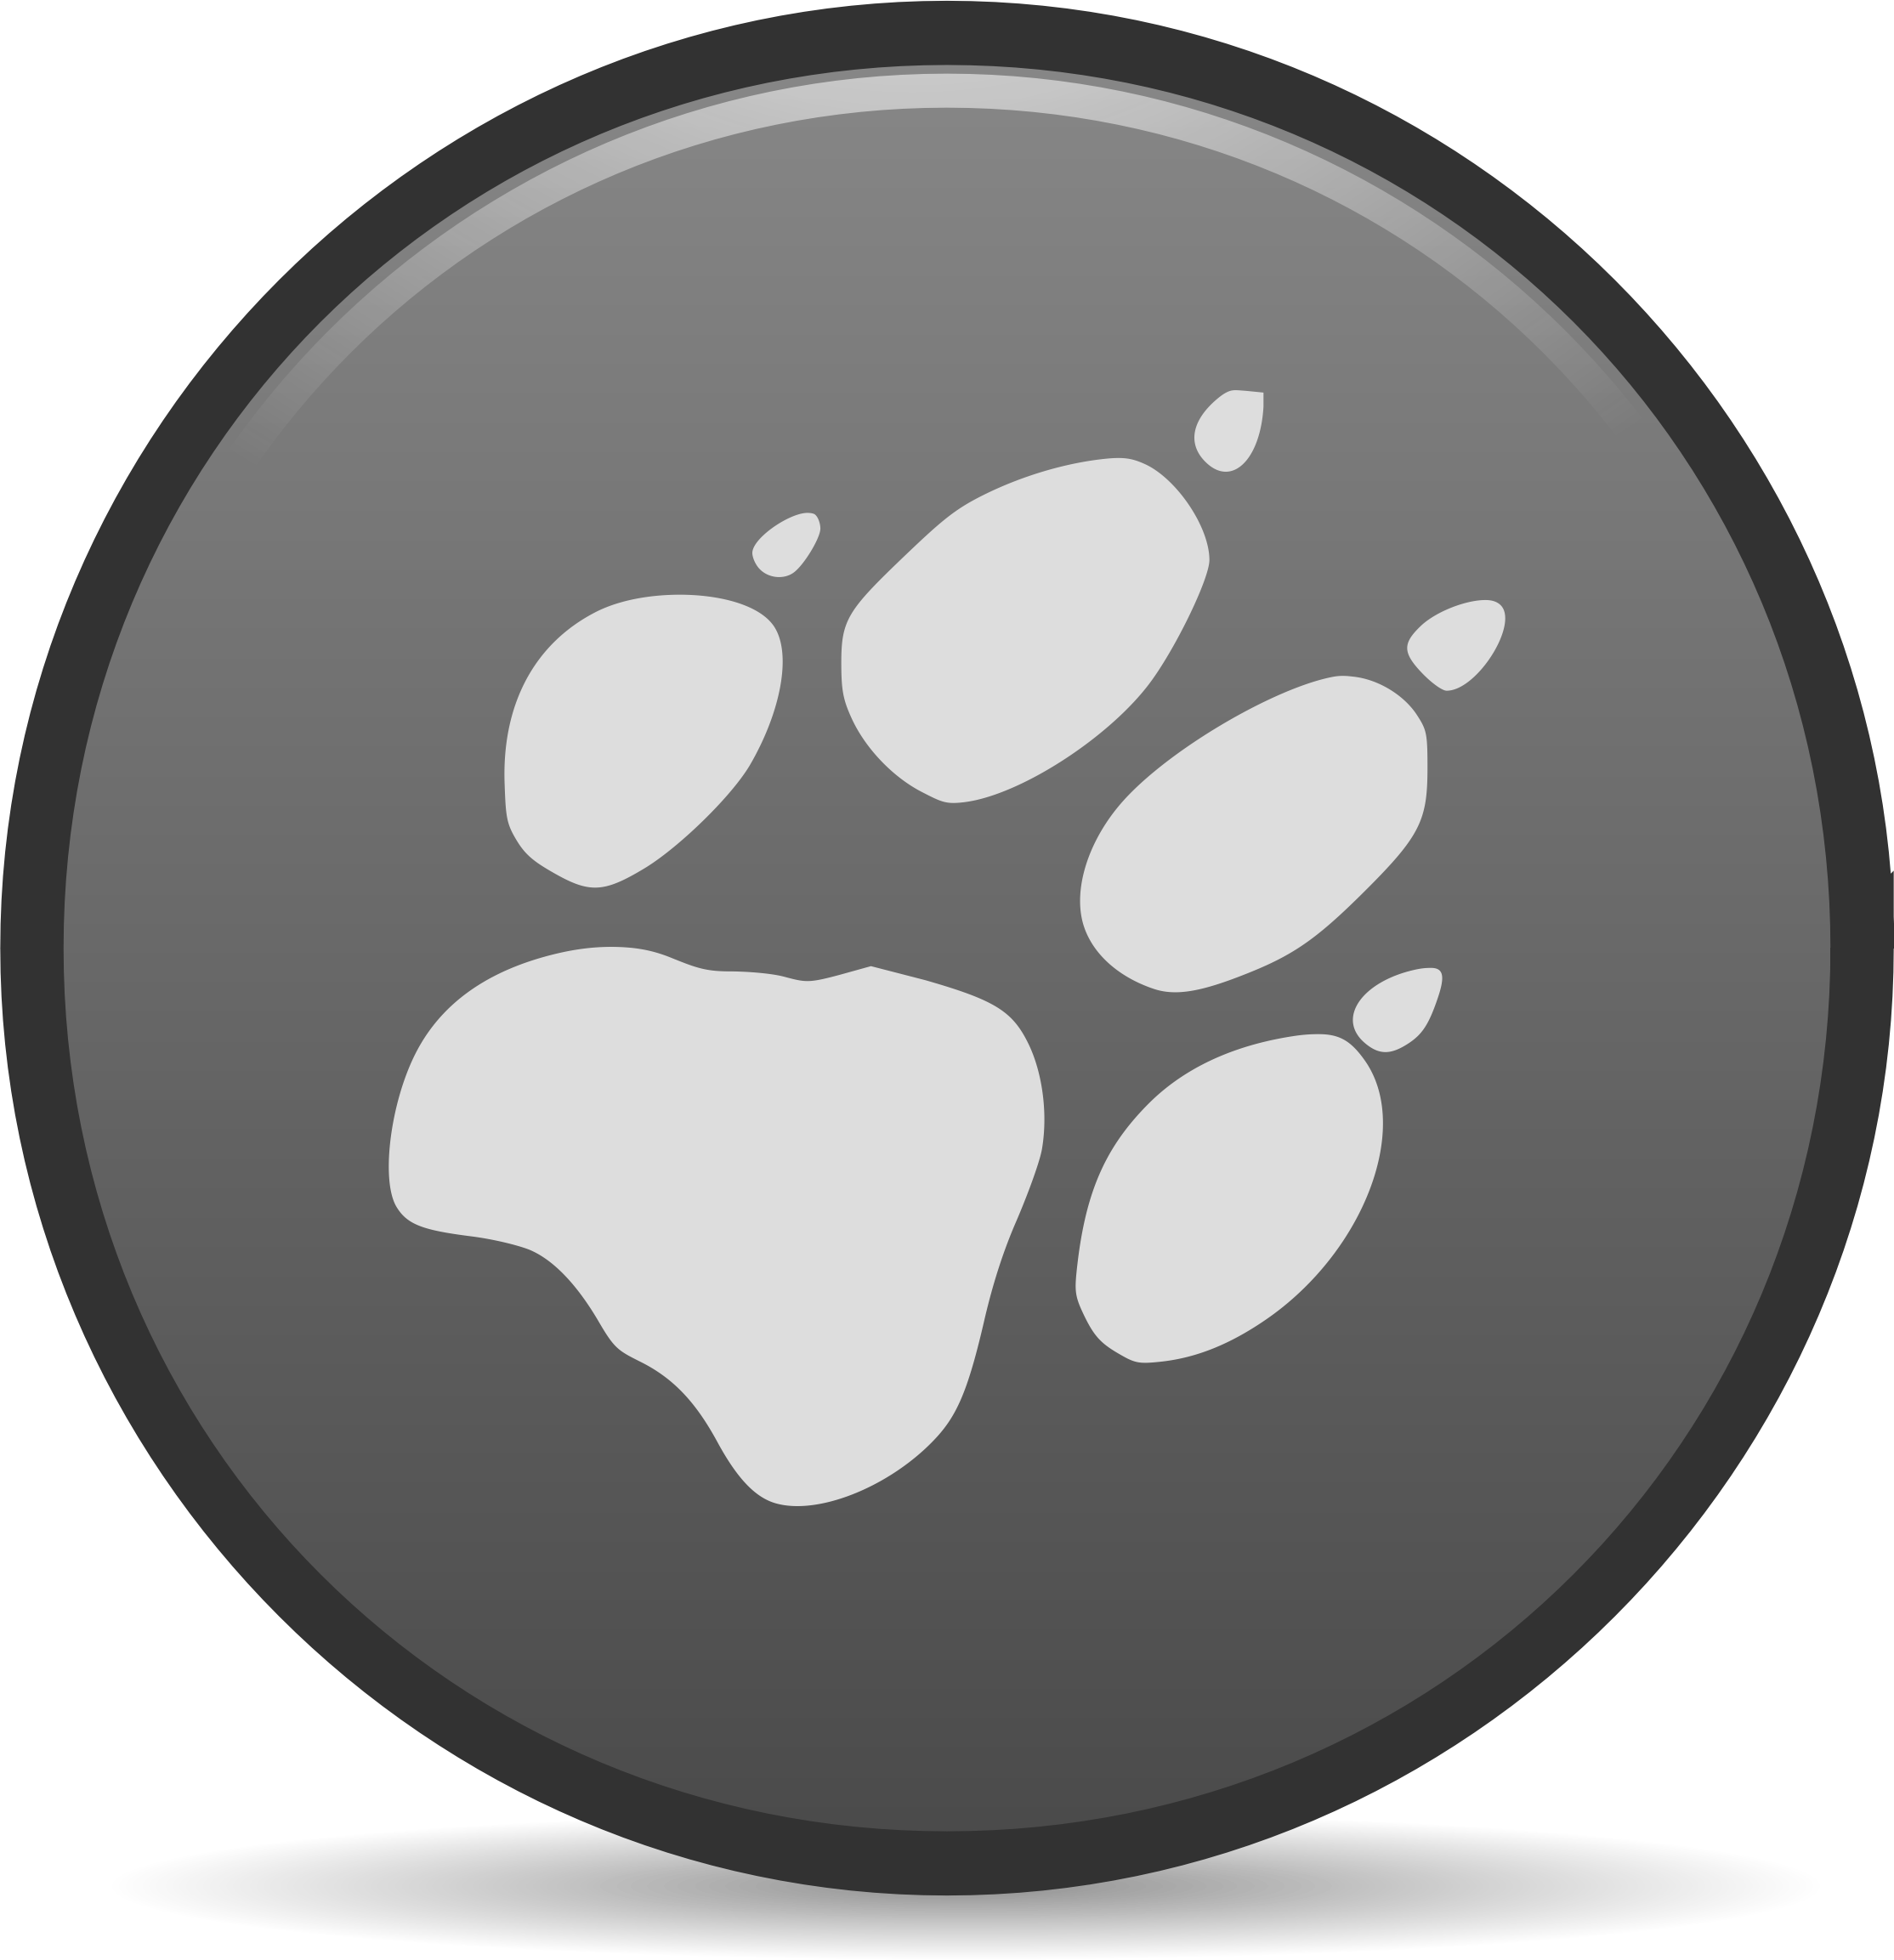 footprints clipart icon